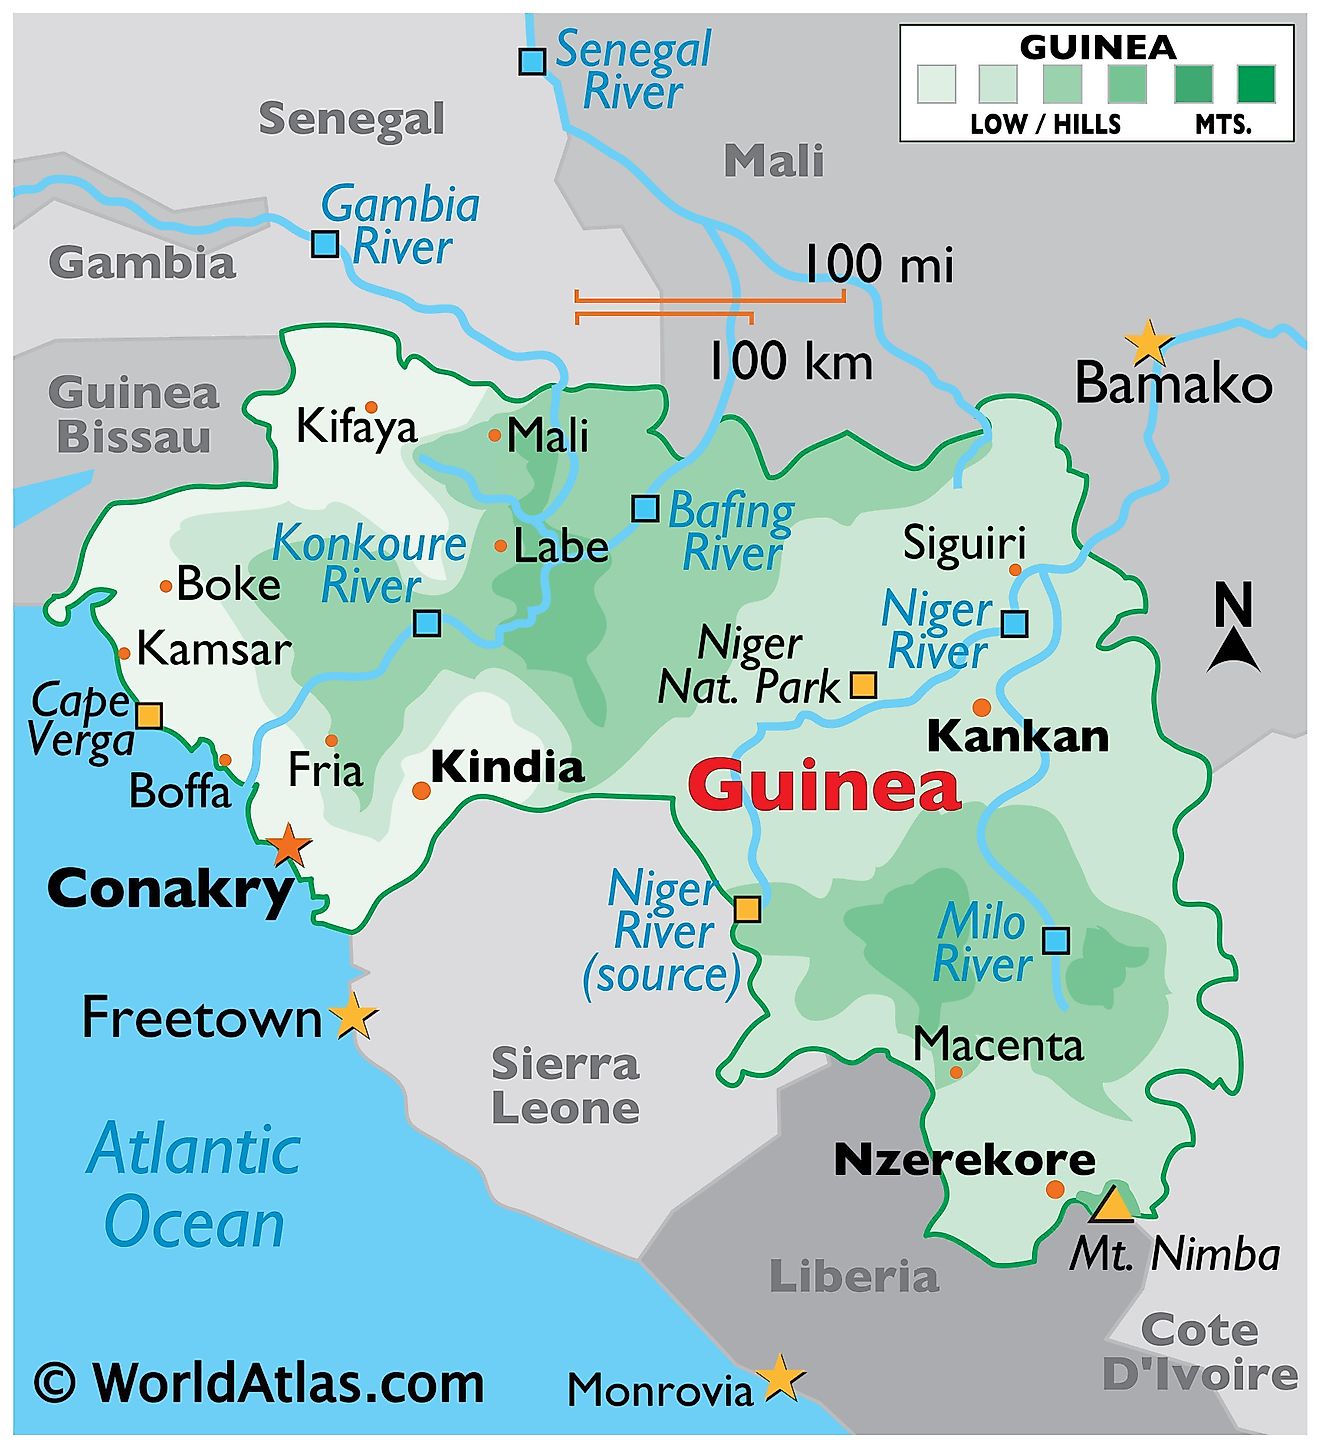 Physical Map of Guinea displaying its state boundaries, relief, major rivers, important cities, highest elevation, etc.